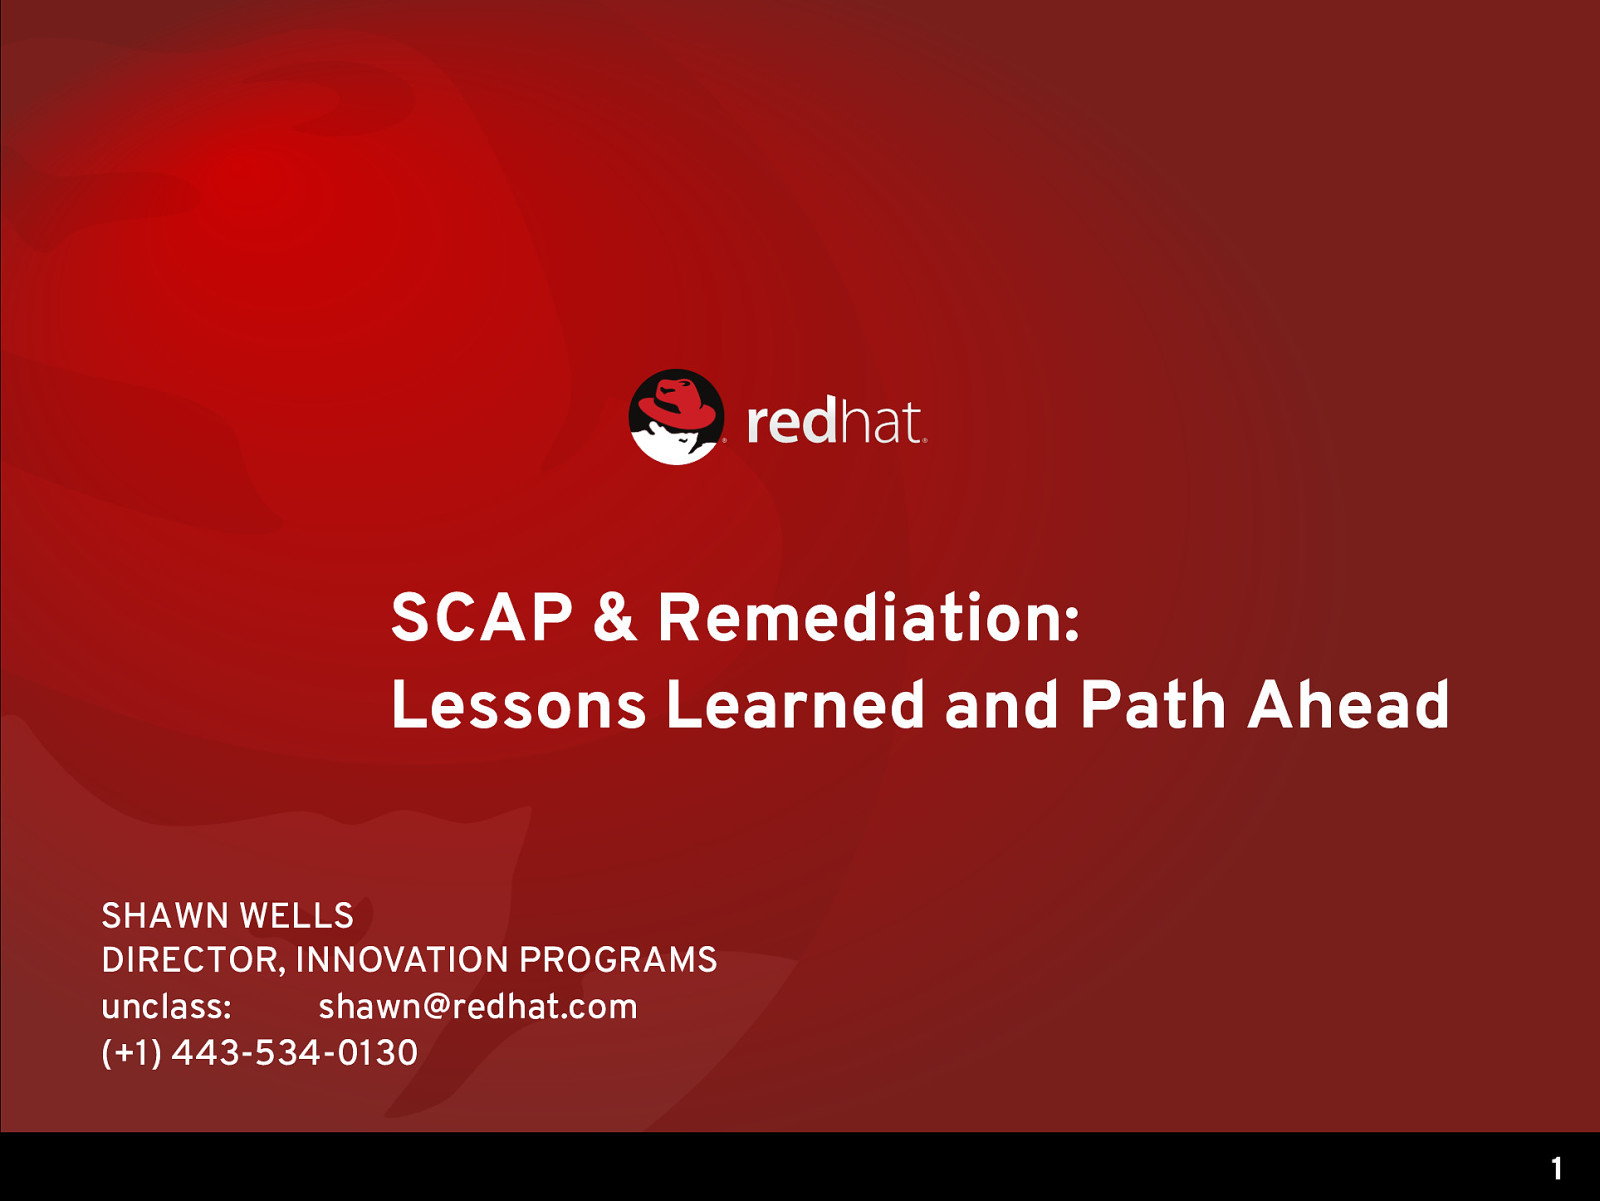 SCAP & Remediation: Lessons Learned and Path Ahead